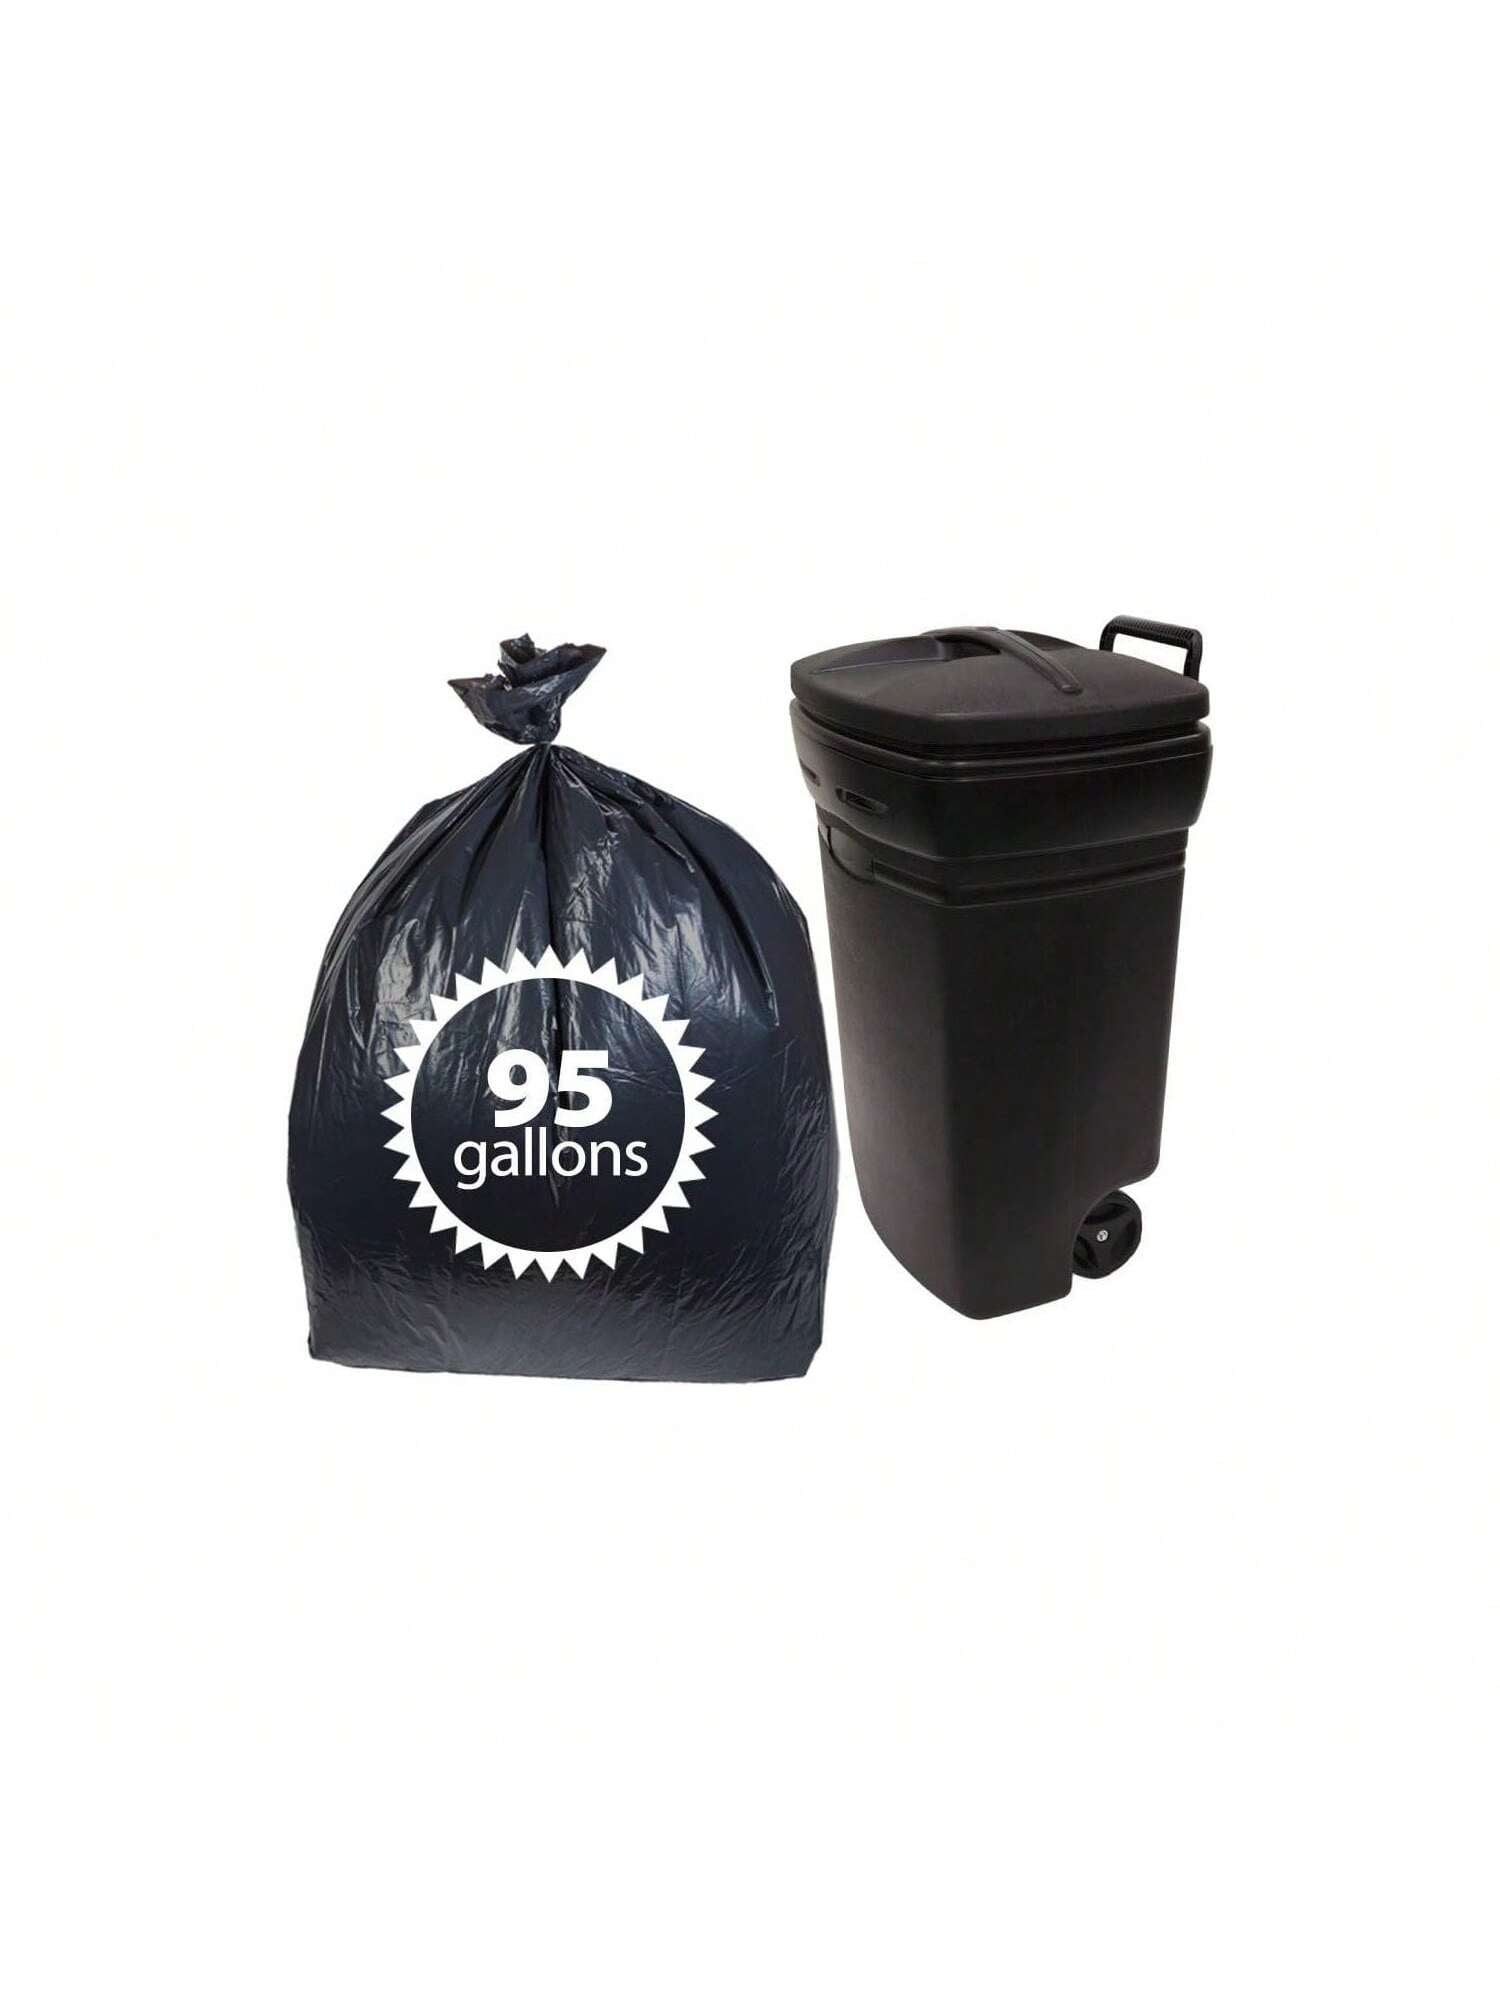 Jessie Shop 500 Counts 33 Gallon Trash Bags, 39 x 32'' Black Garbage Bags  Heavy Duty Contractor Bags Garbage Can Liner for Home, Restaurants,  Kitchen, Lawn, and Industrial